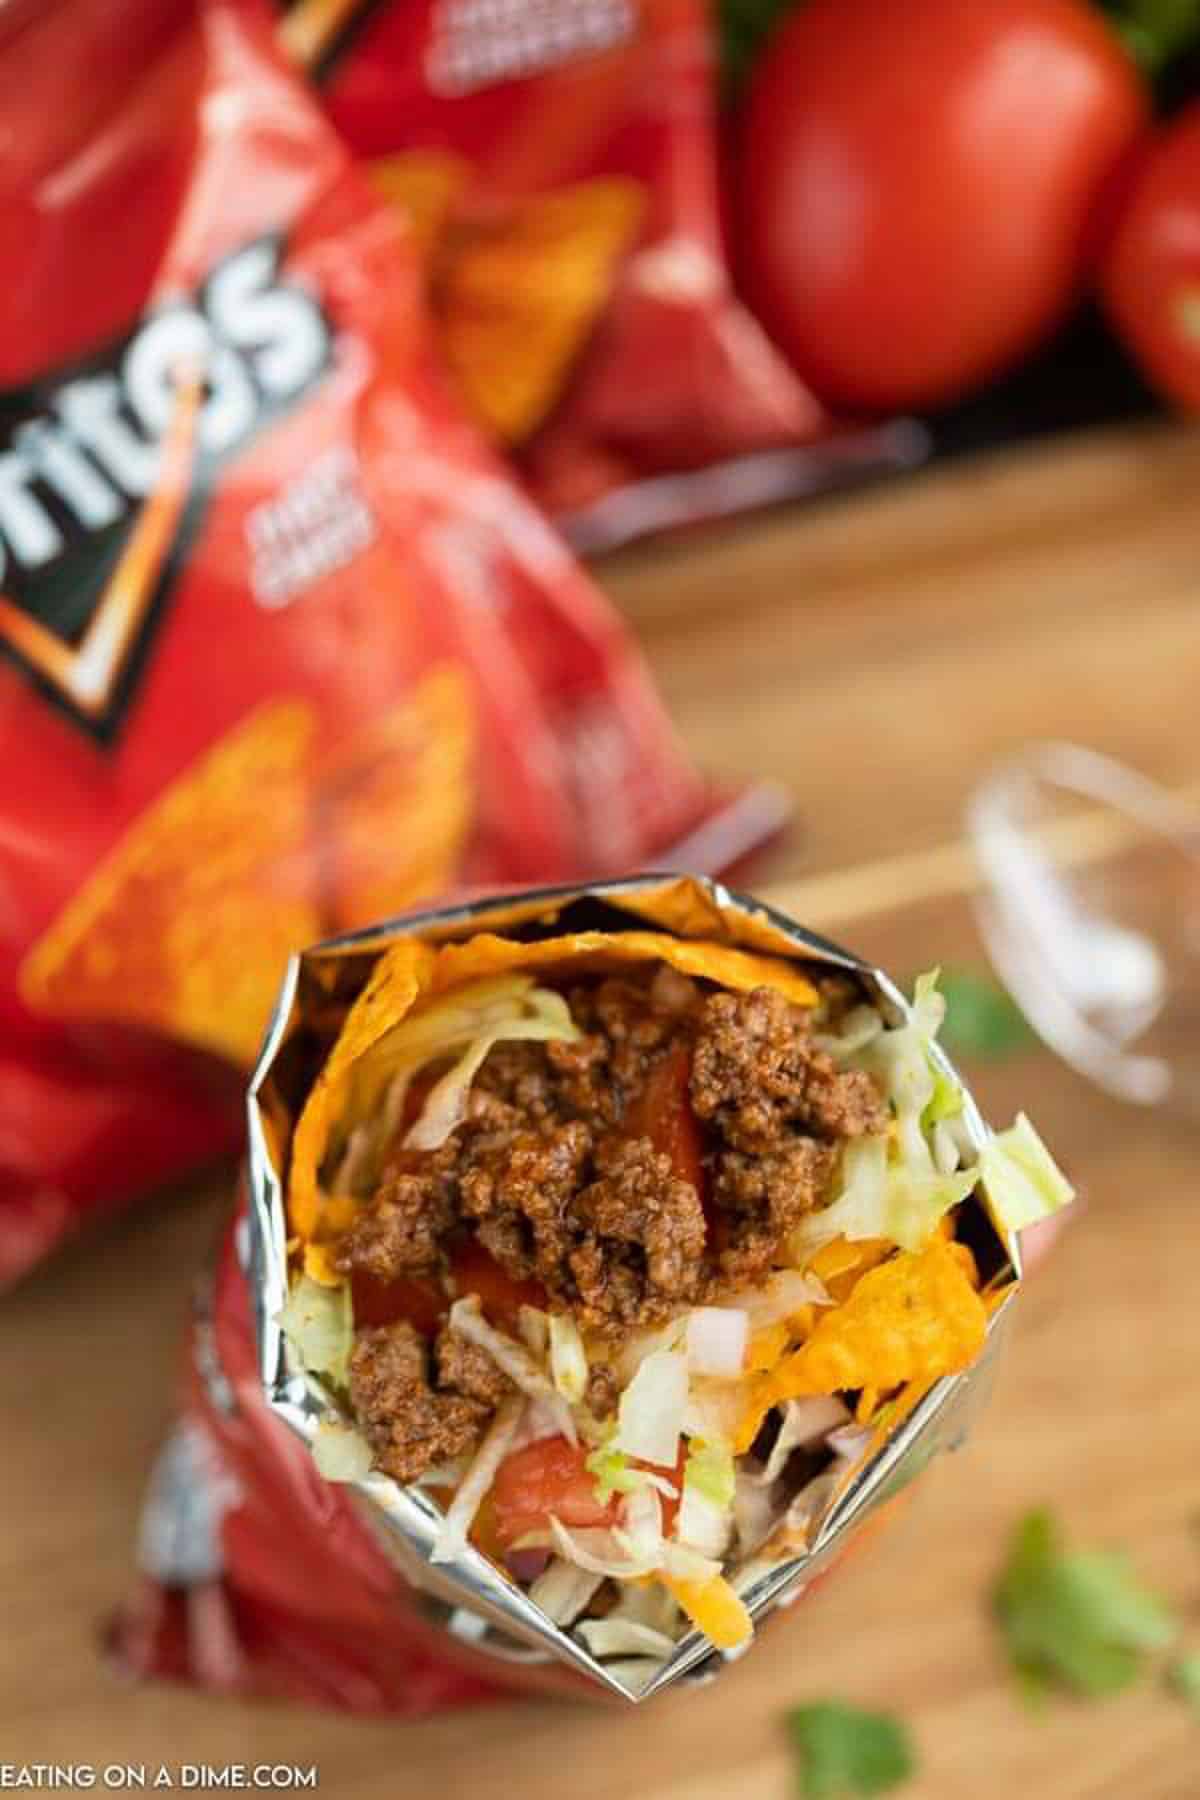 Overview of the top of a walking taco with extra bags of Doritos behind it. 